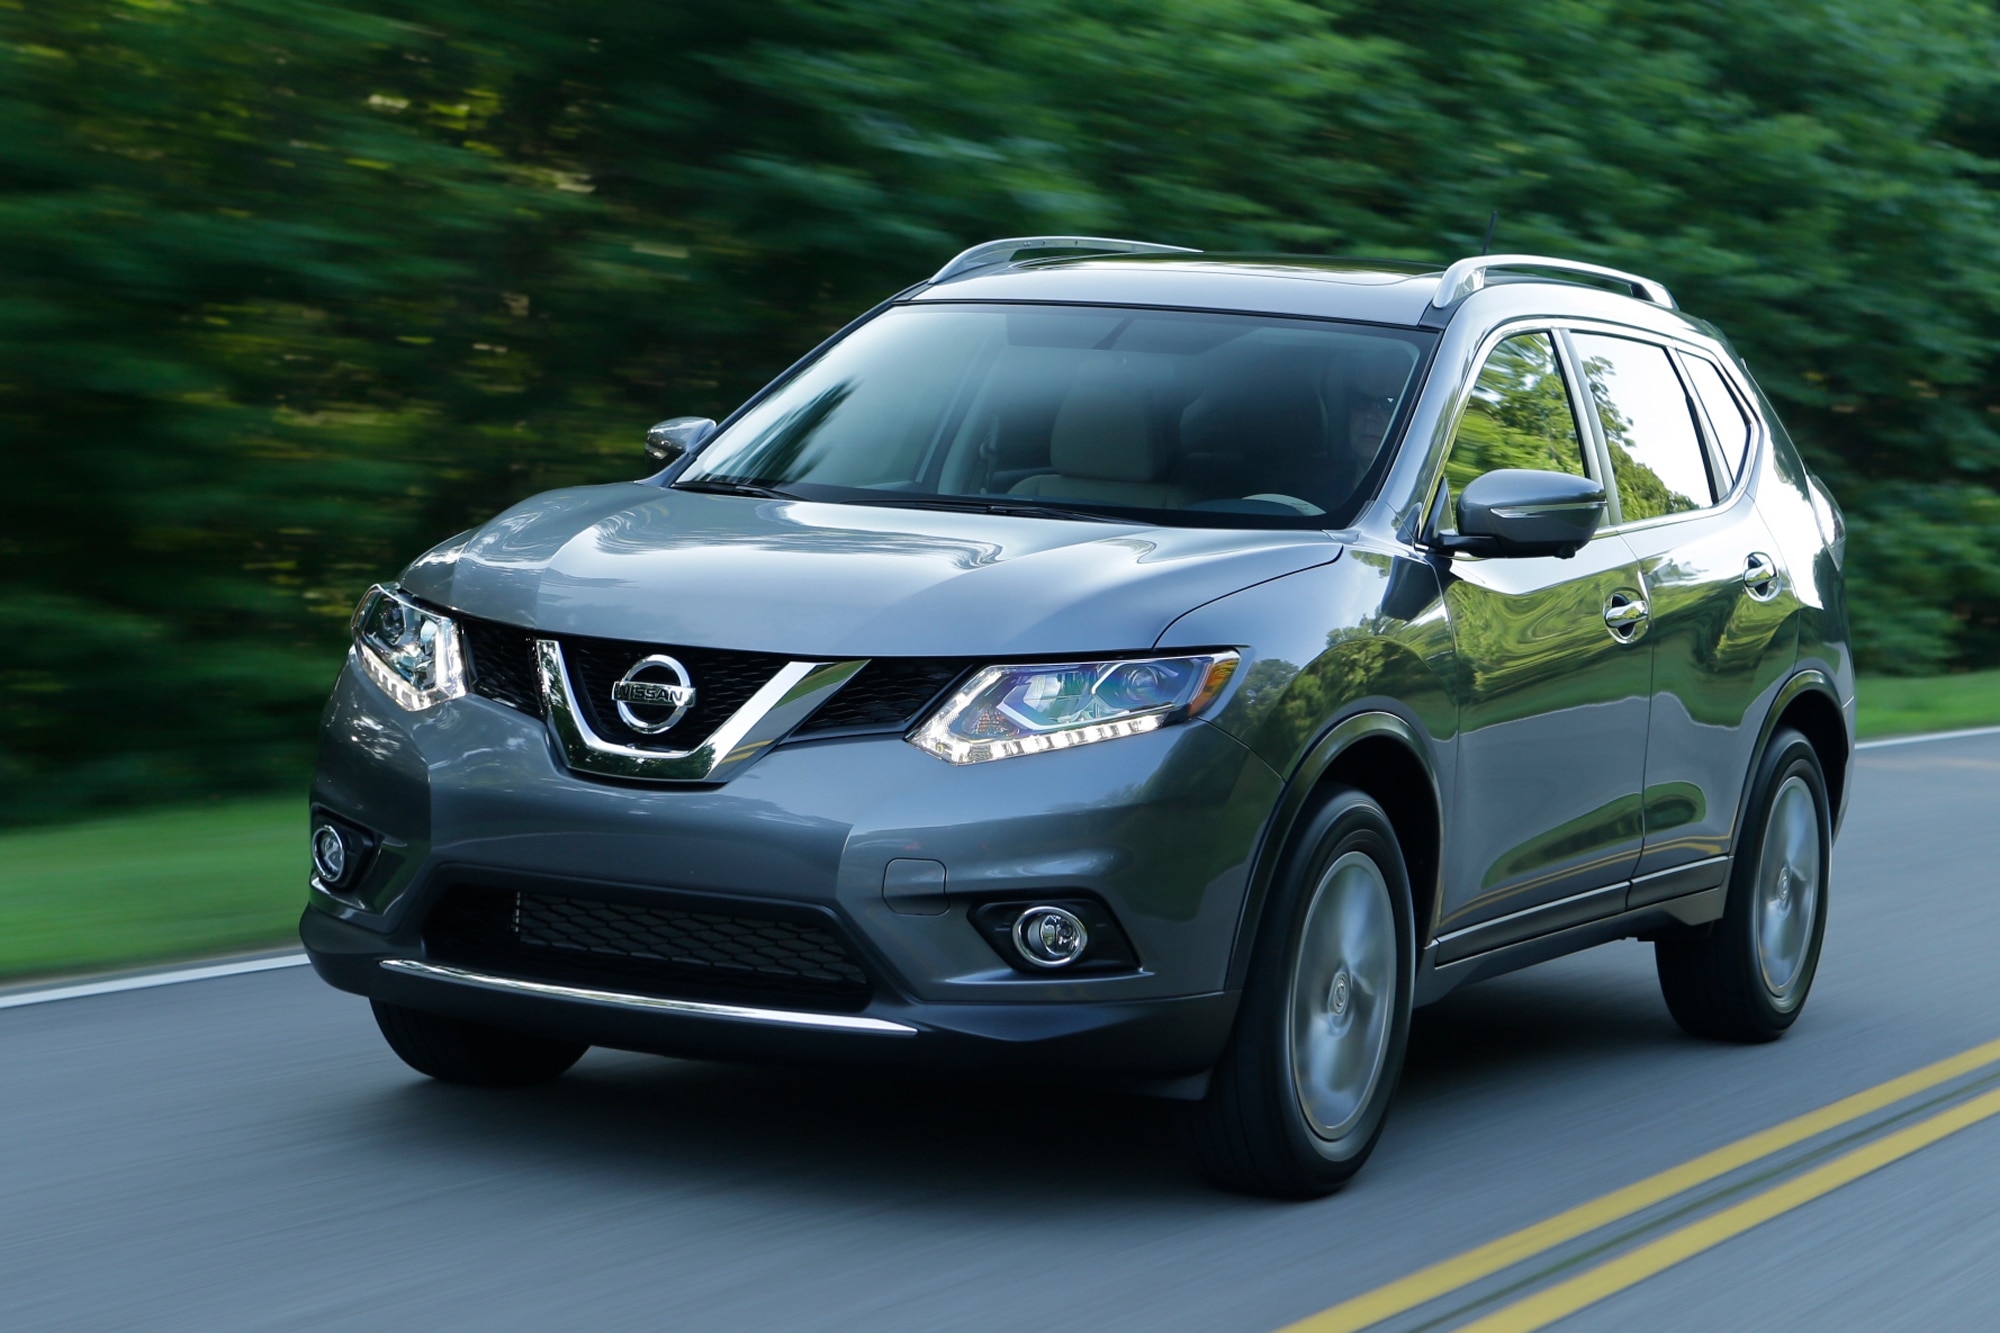 Blue 2014 Nissan Rogue on highway